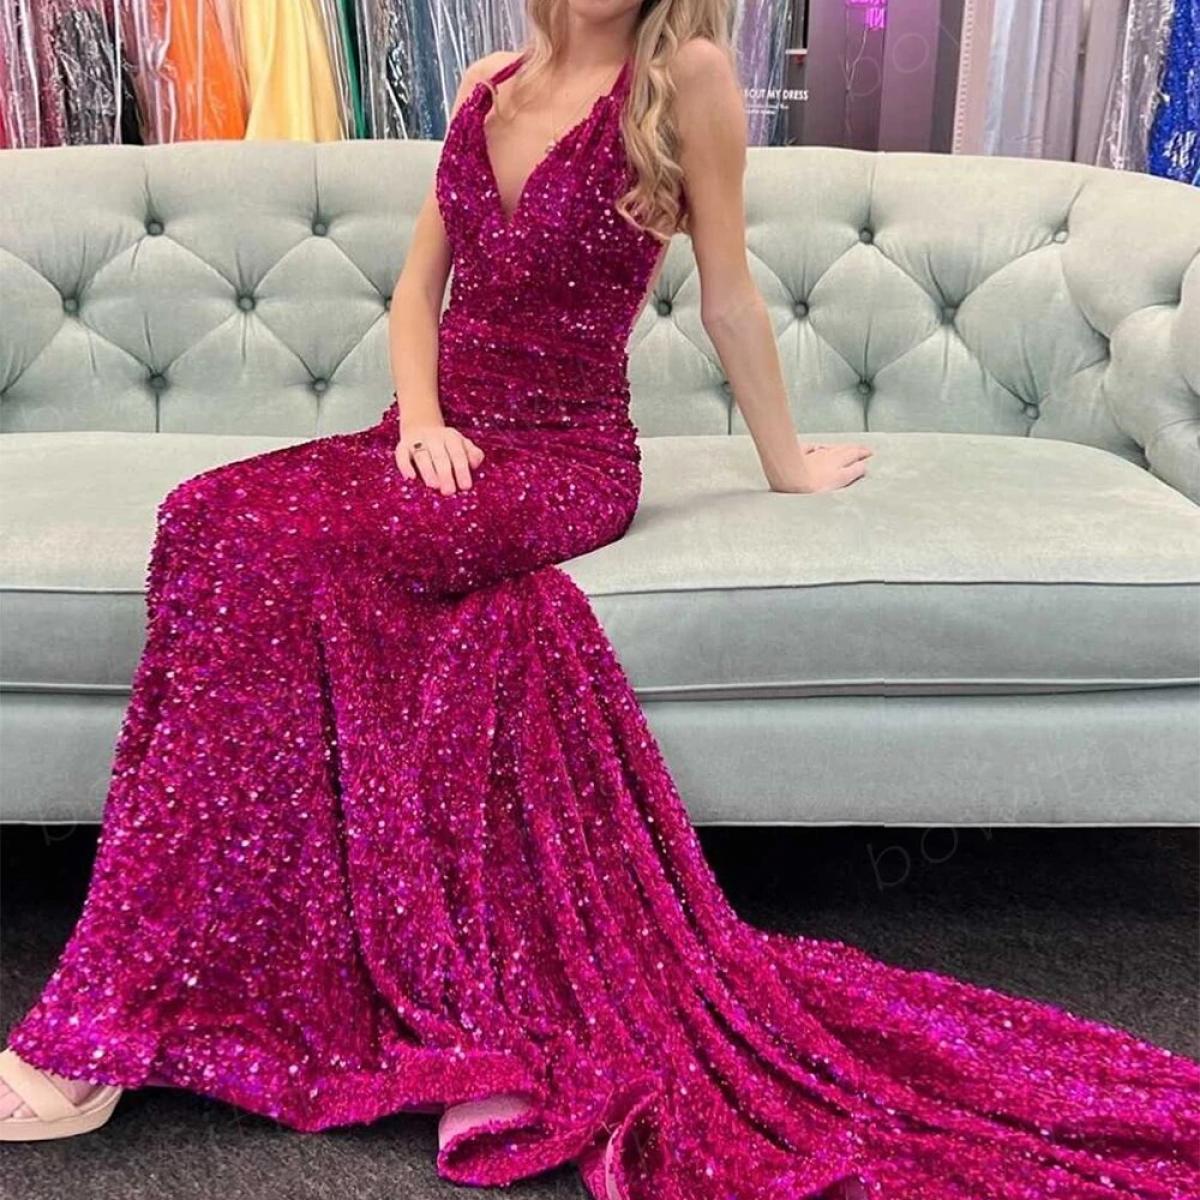 Bowith Halter Sequins Prom Dress 2023 Mermaid Evening Dresses Shiny Party Dresses For Women Elegant Formal Occasion Dres